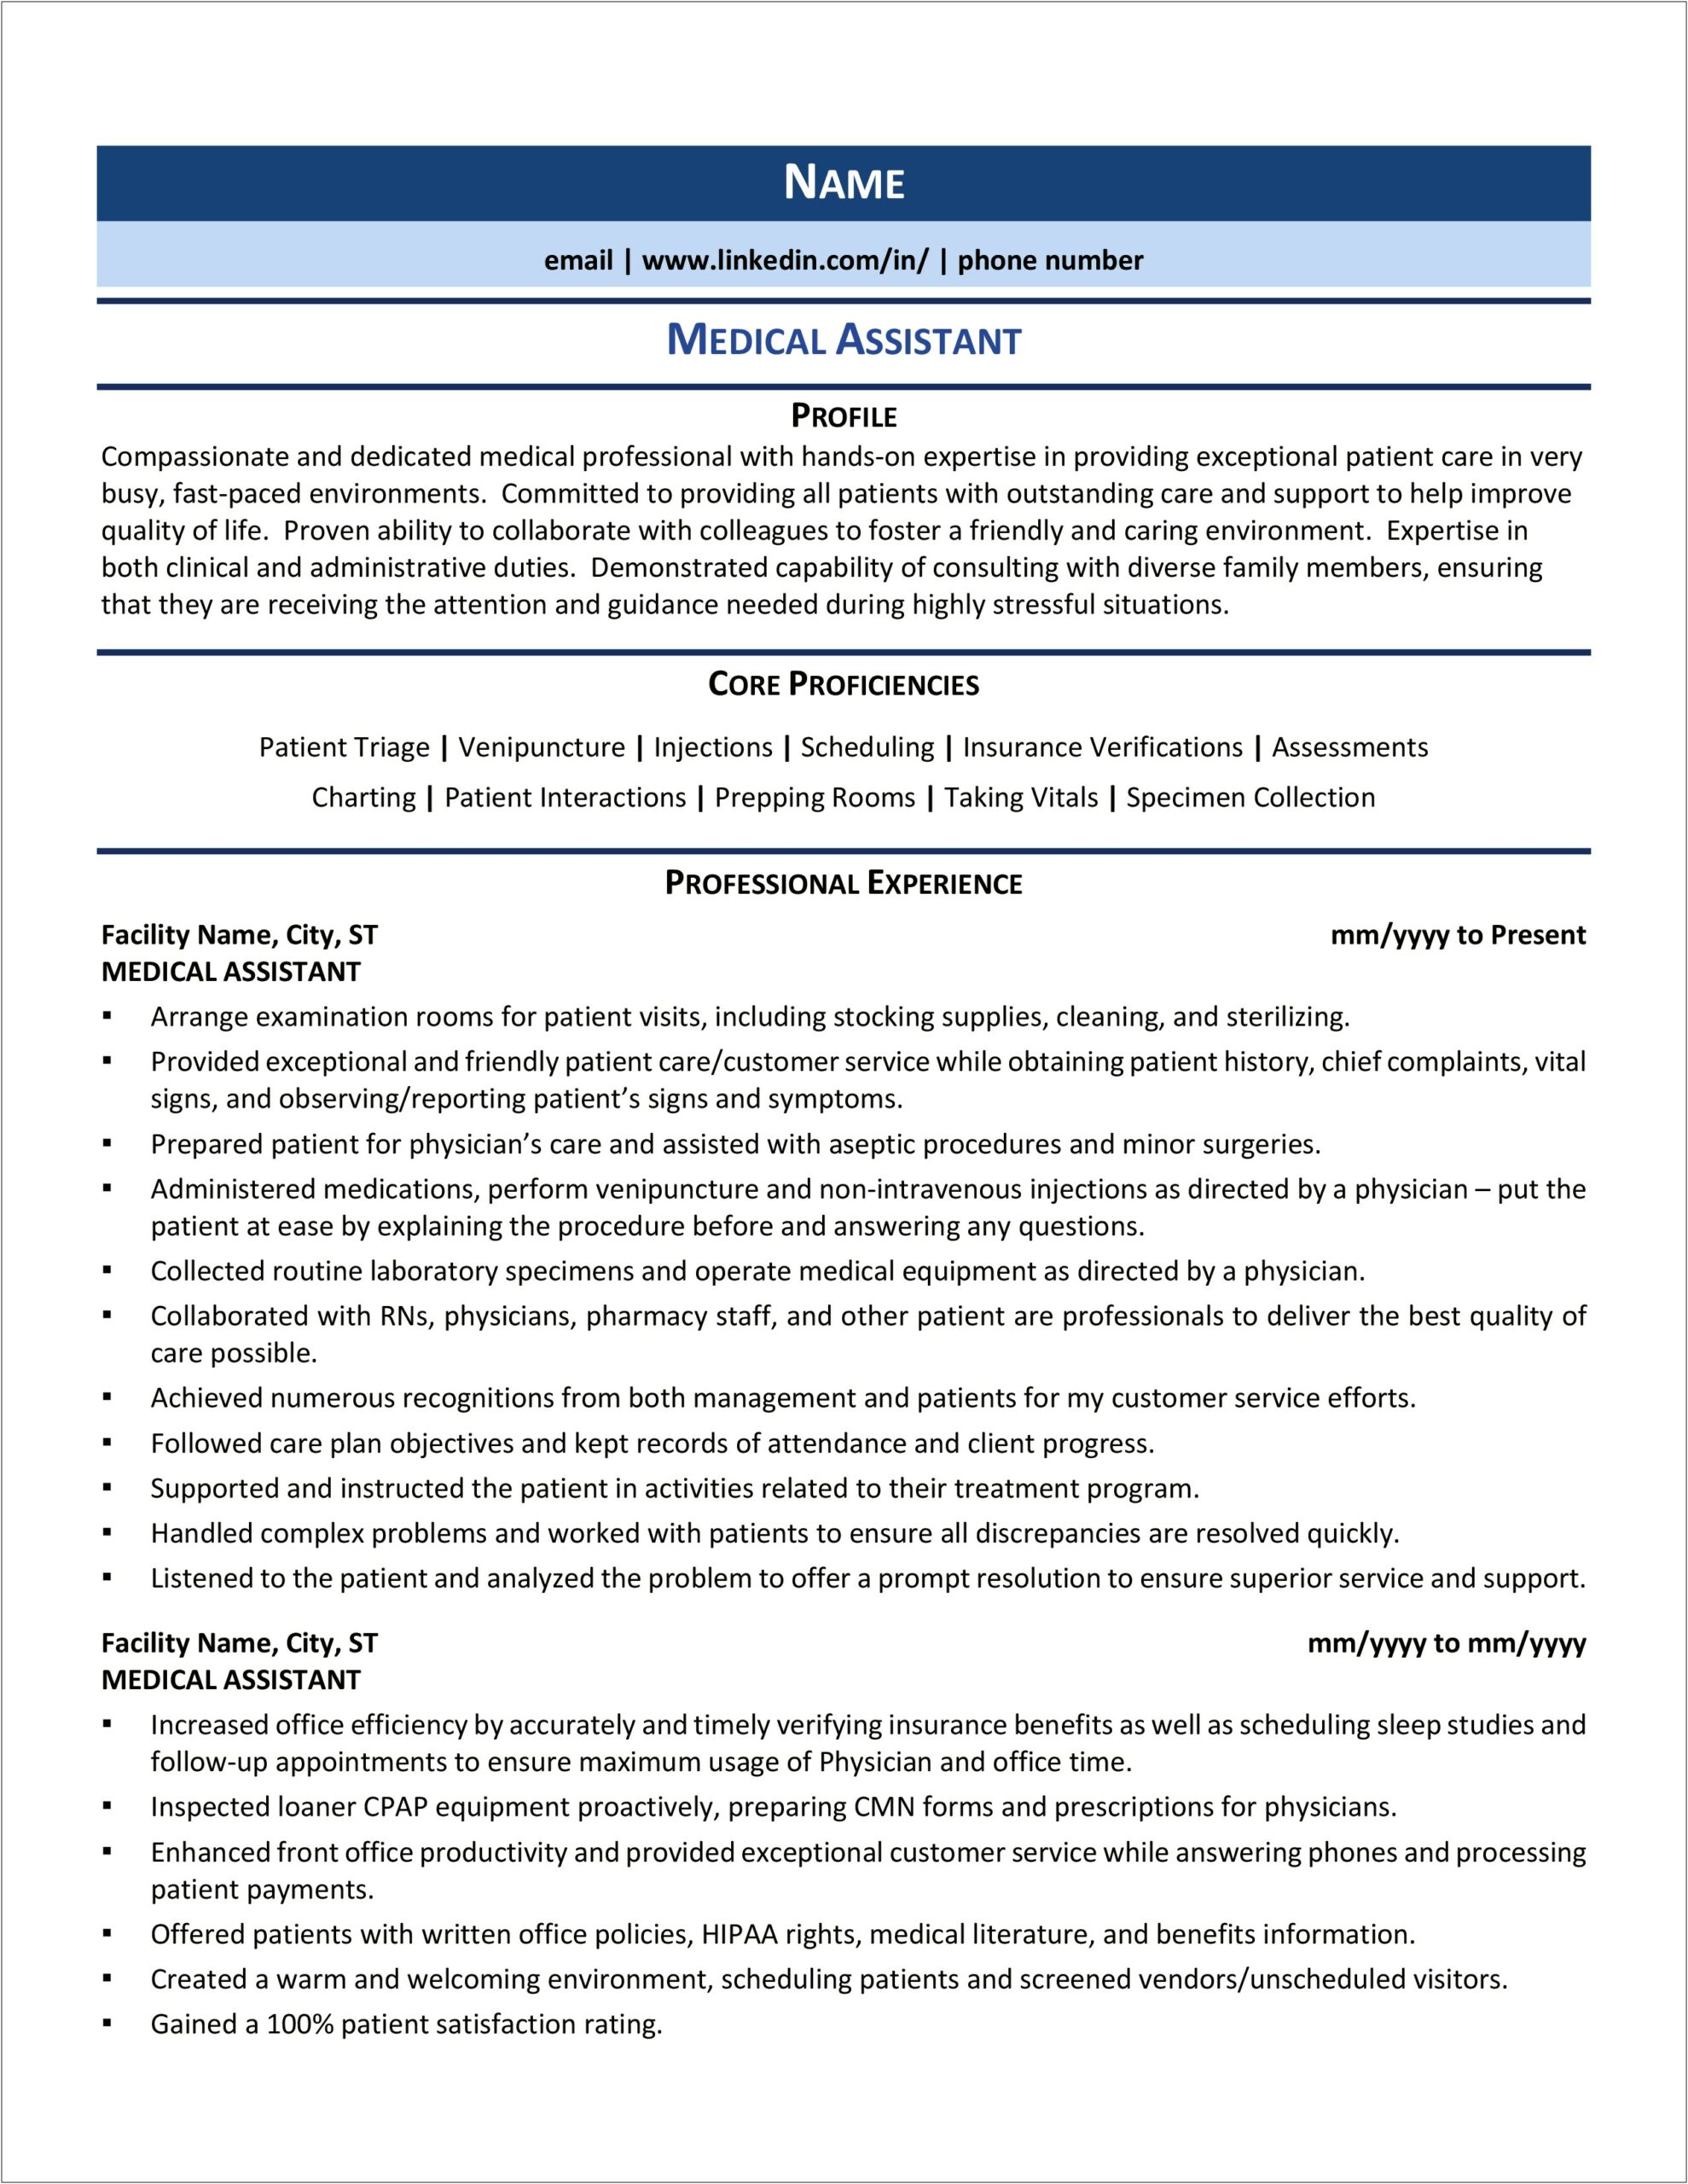 Professional Summary On Resume For Medical Assistant